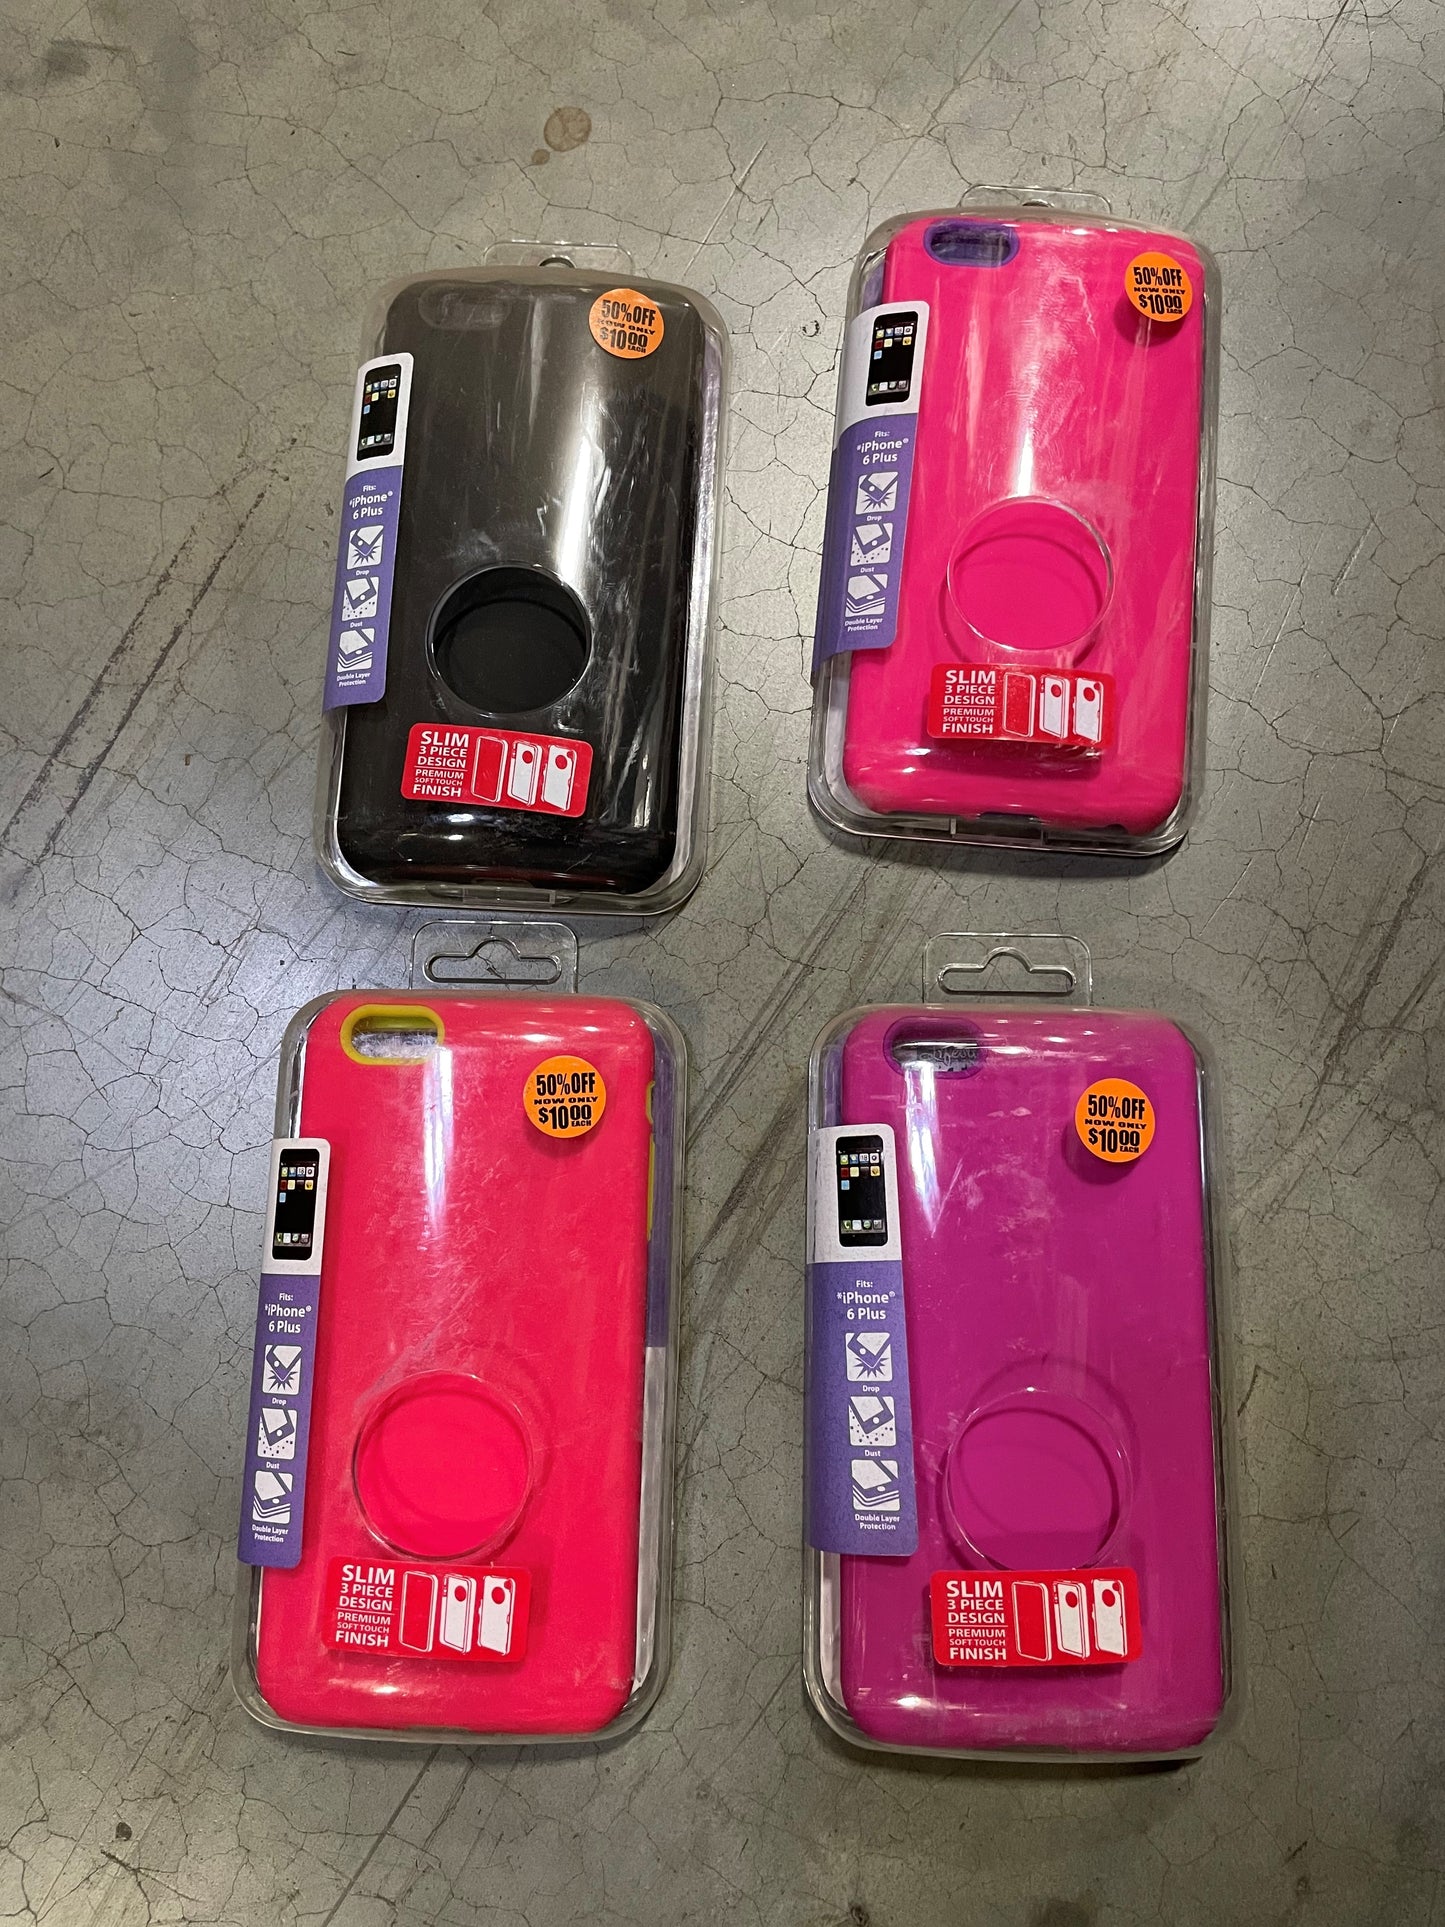 ITEM NUMBER 021076L MIXED CELL CASE IP6+ - STORE SURPLUS NO DISPLAY 8 PIECES PER PACK